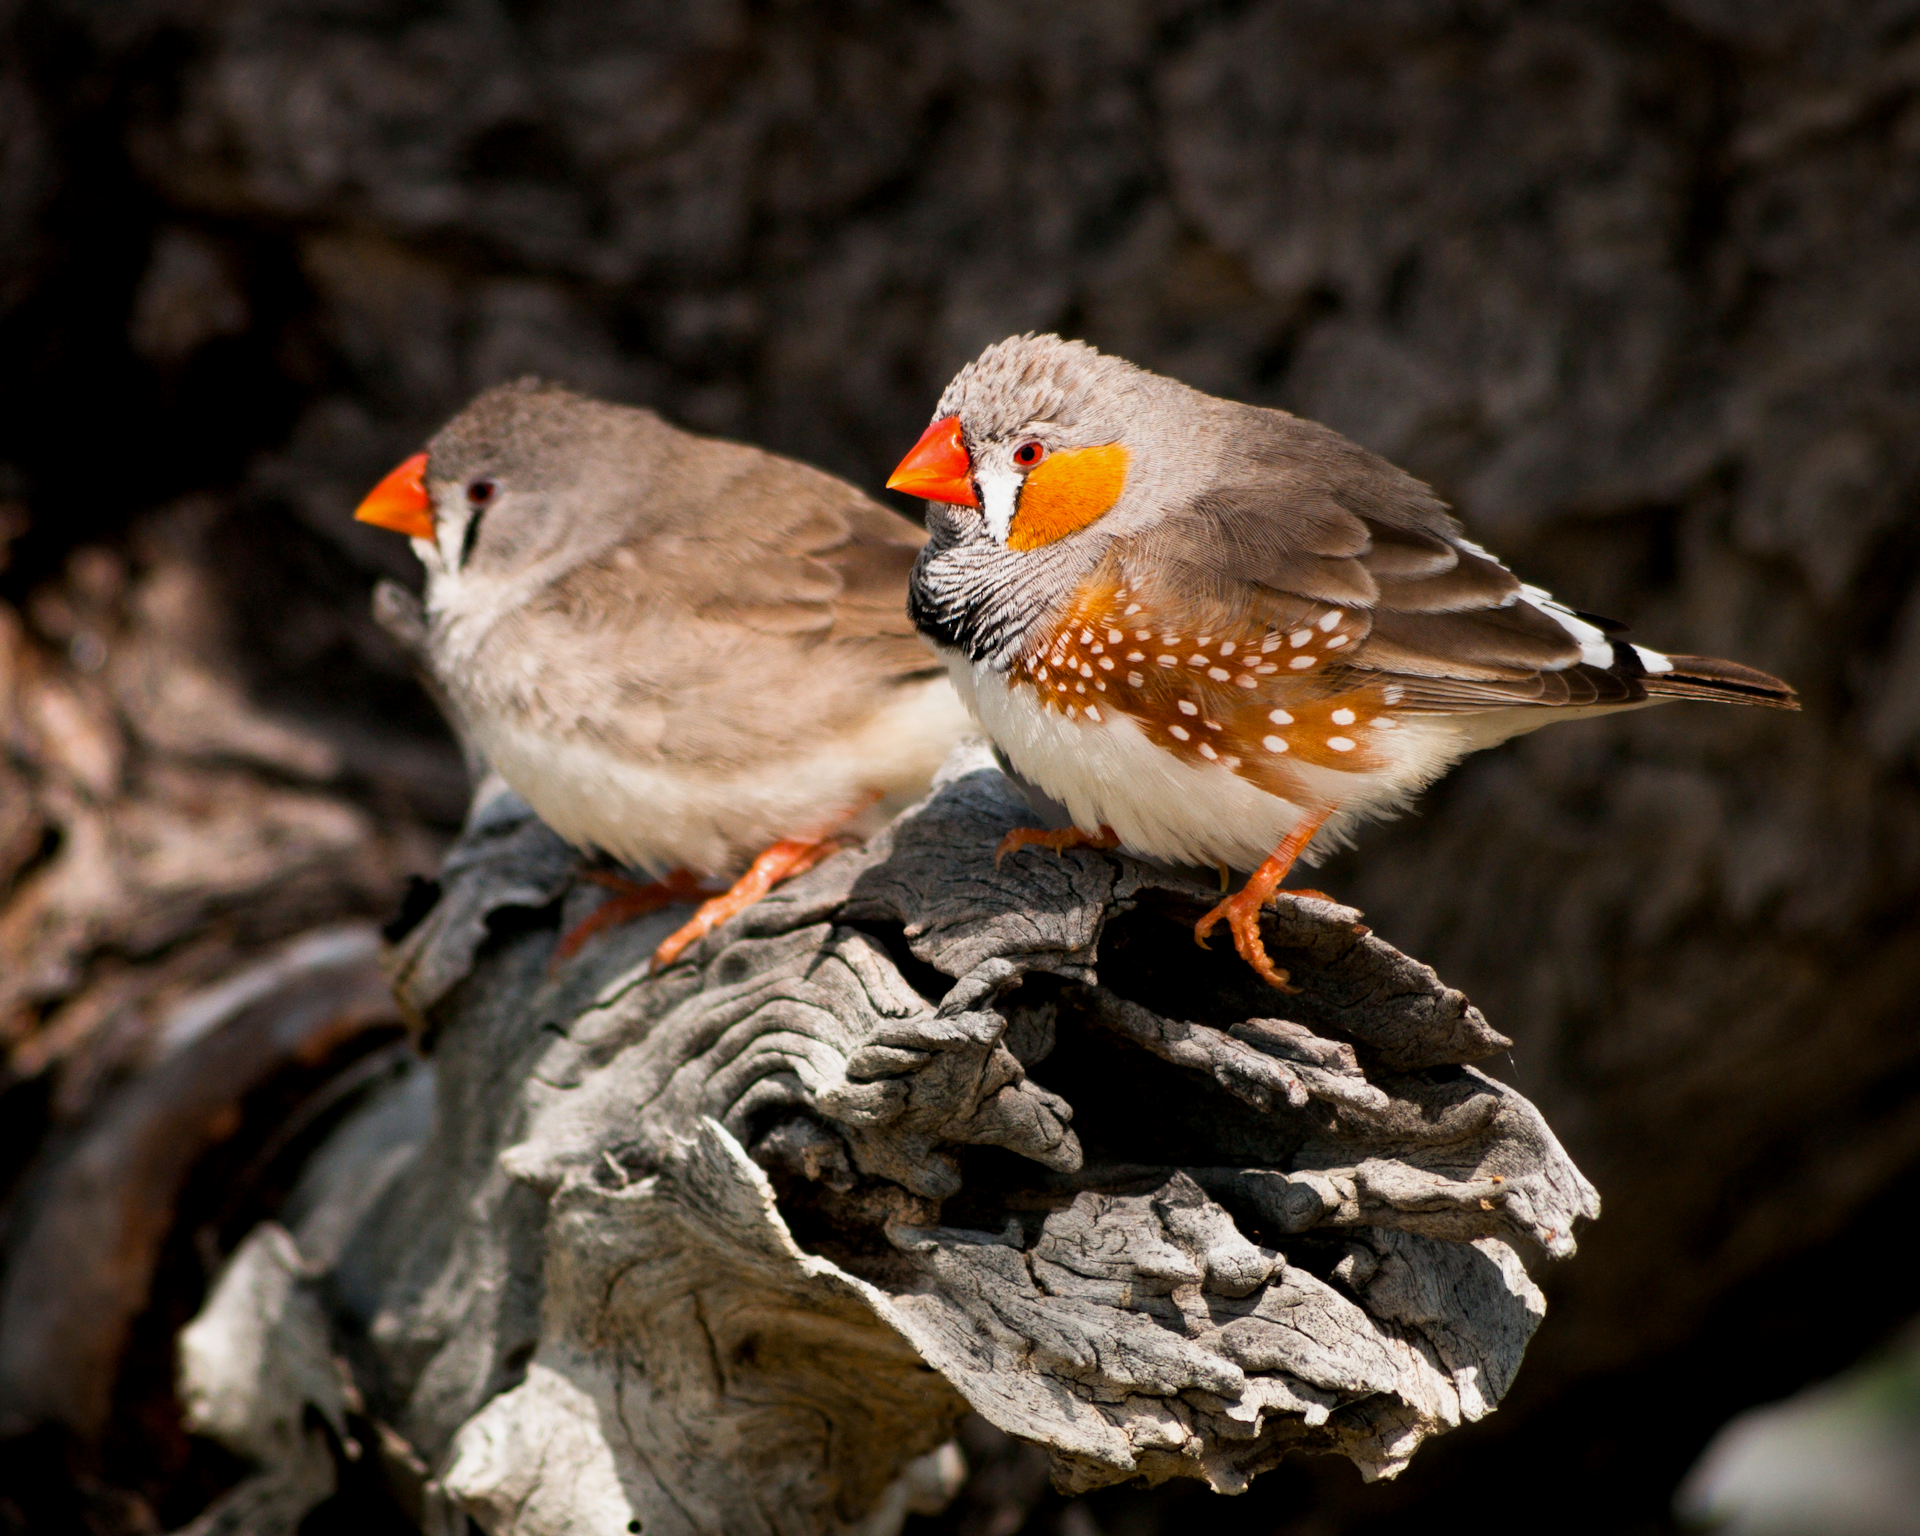 difference between male and female society finches